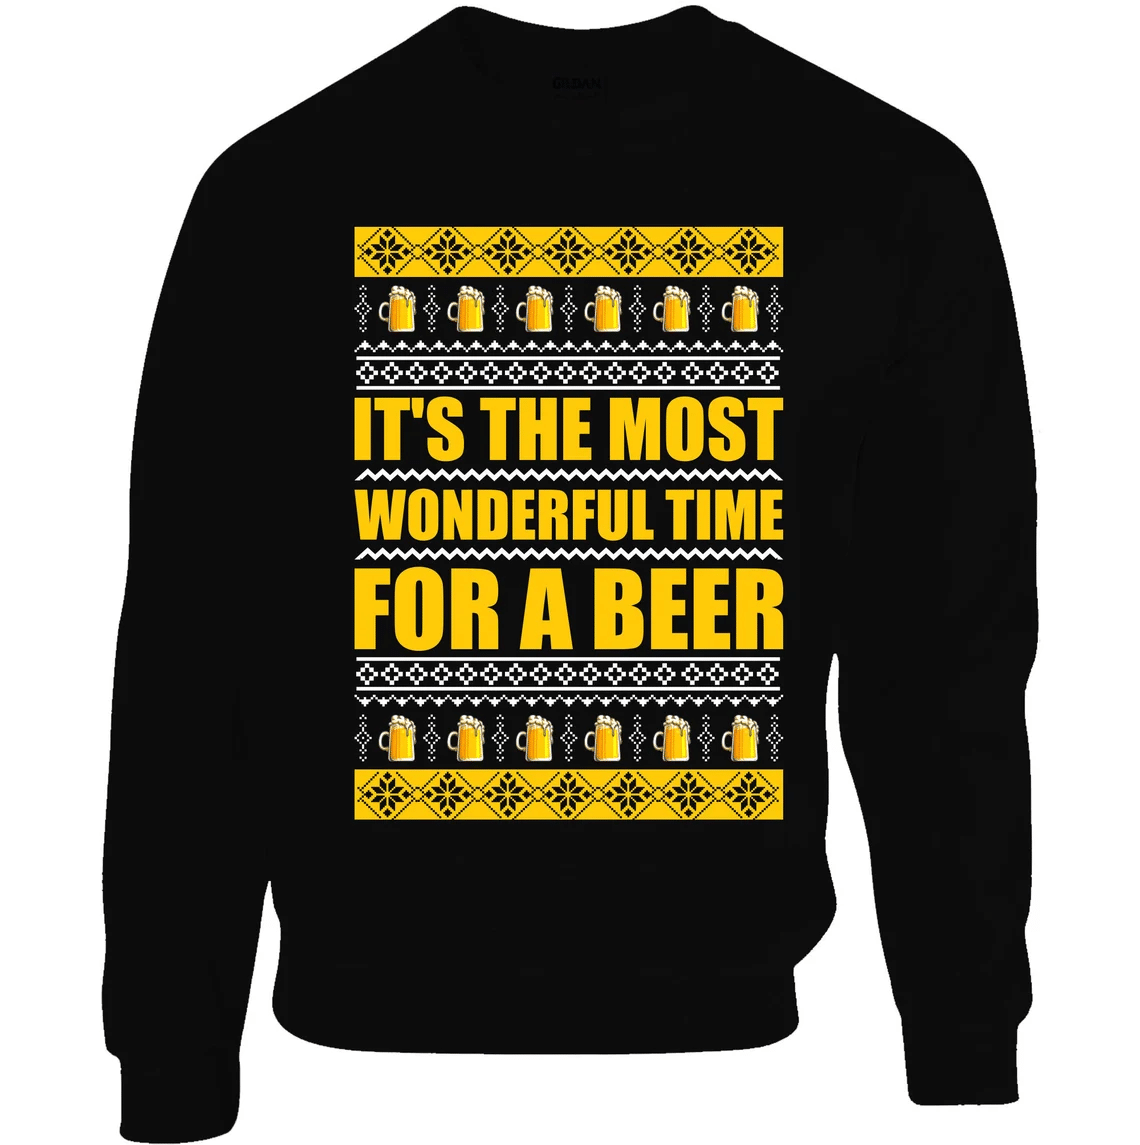 It's The Most Wonderful Time For A Beer Christmas Sweatshirt Style: Sweatshirt, Color: Black